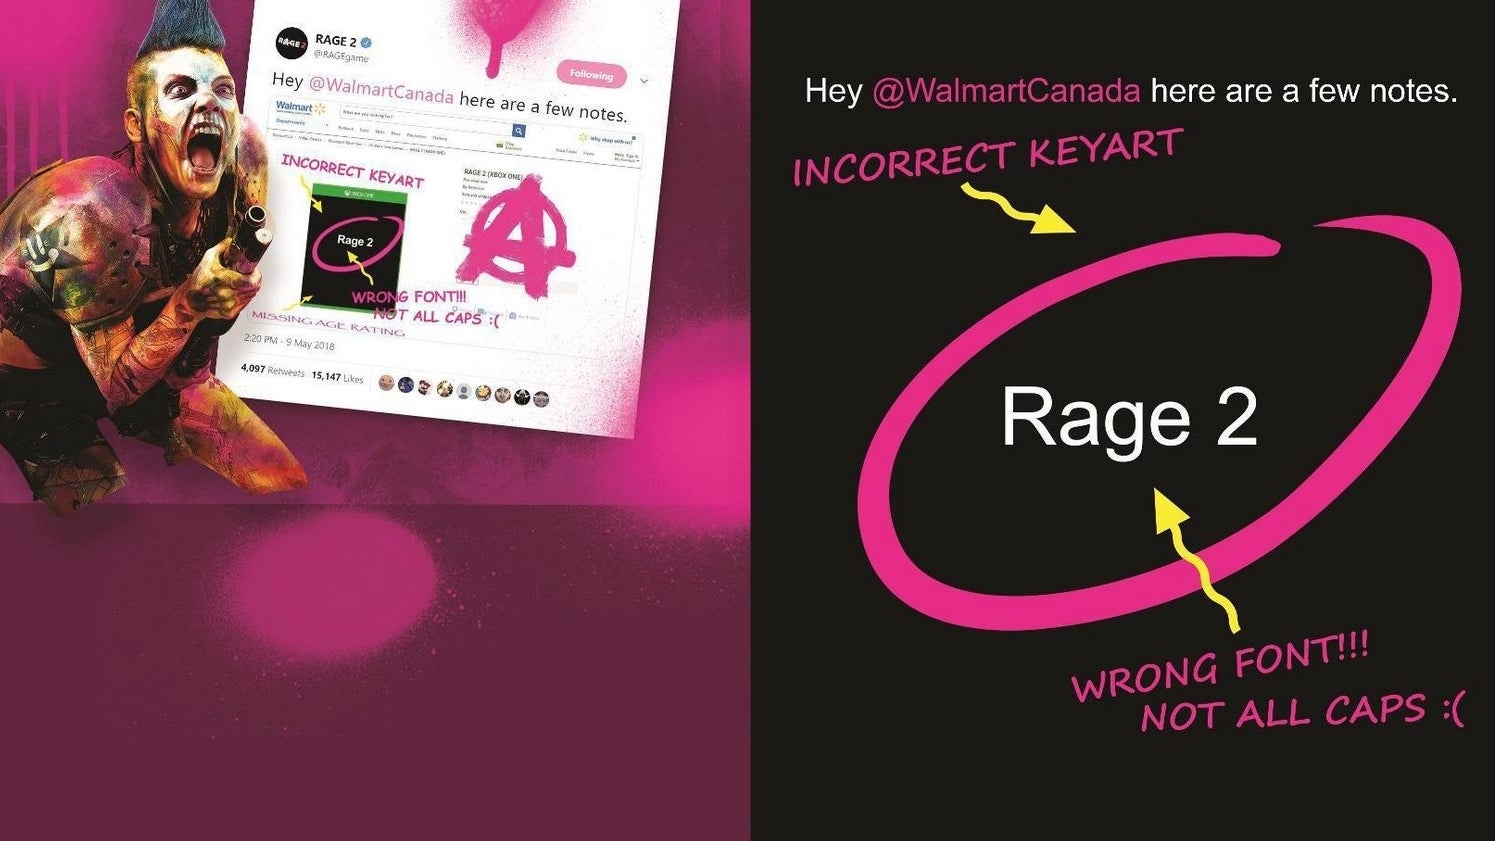 Image for Walmart Canada embraces memes with leaked Rage 2 pre-order bonus